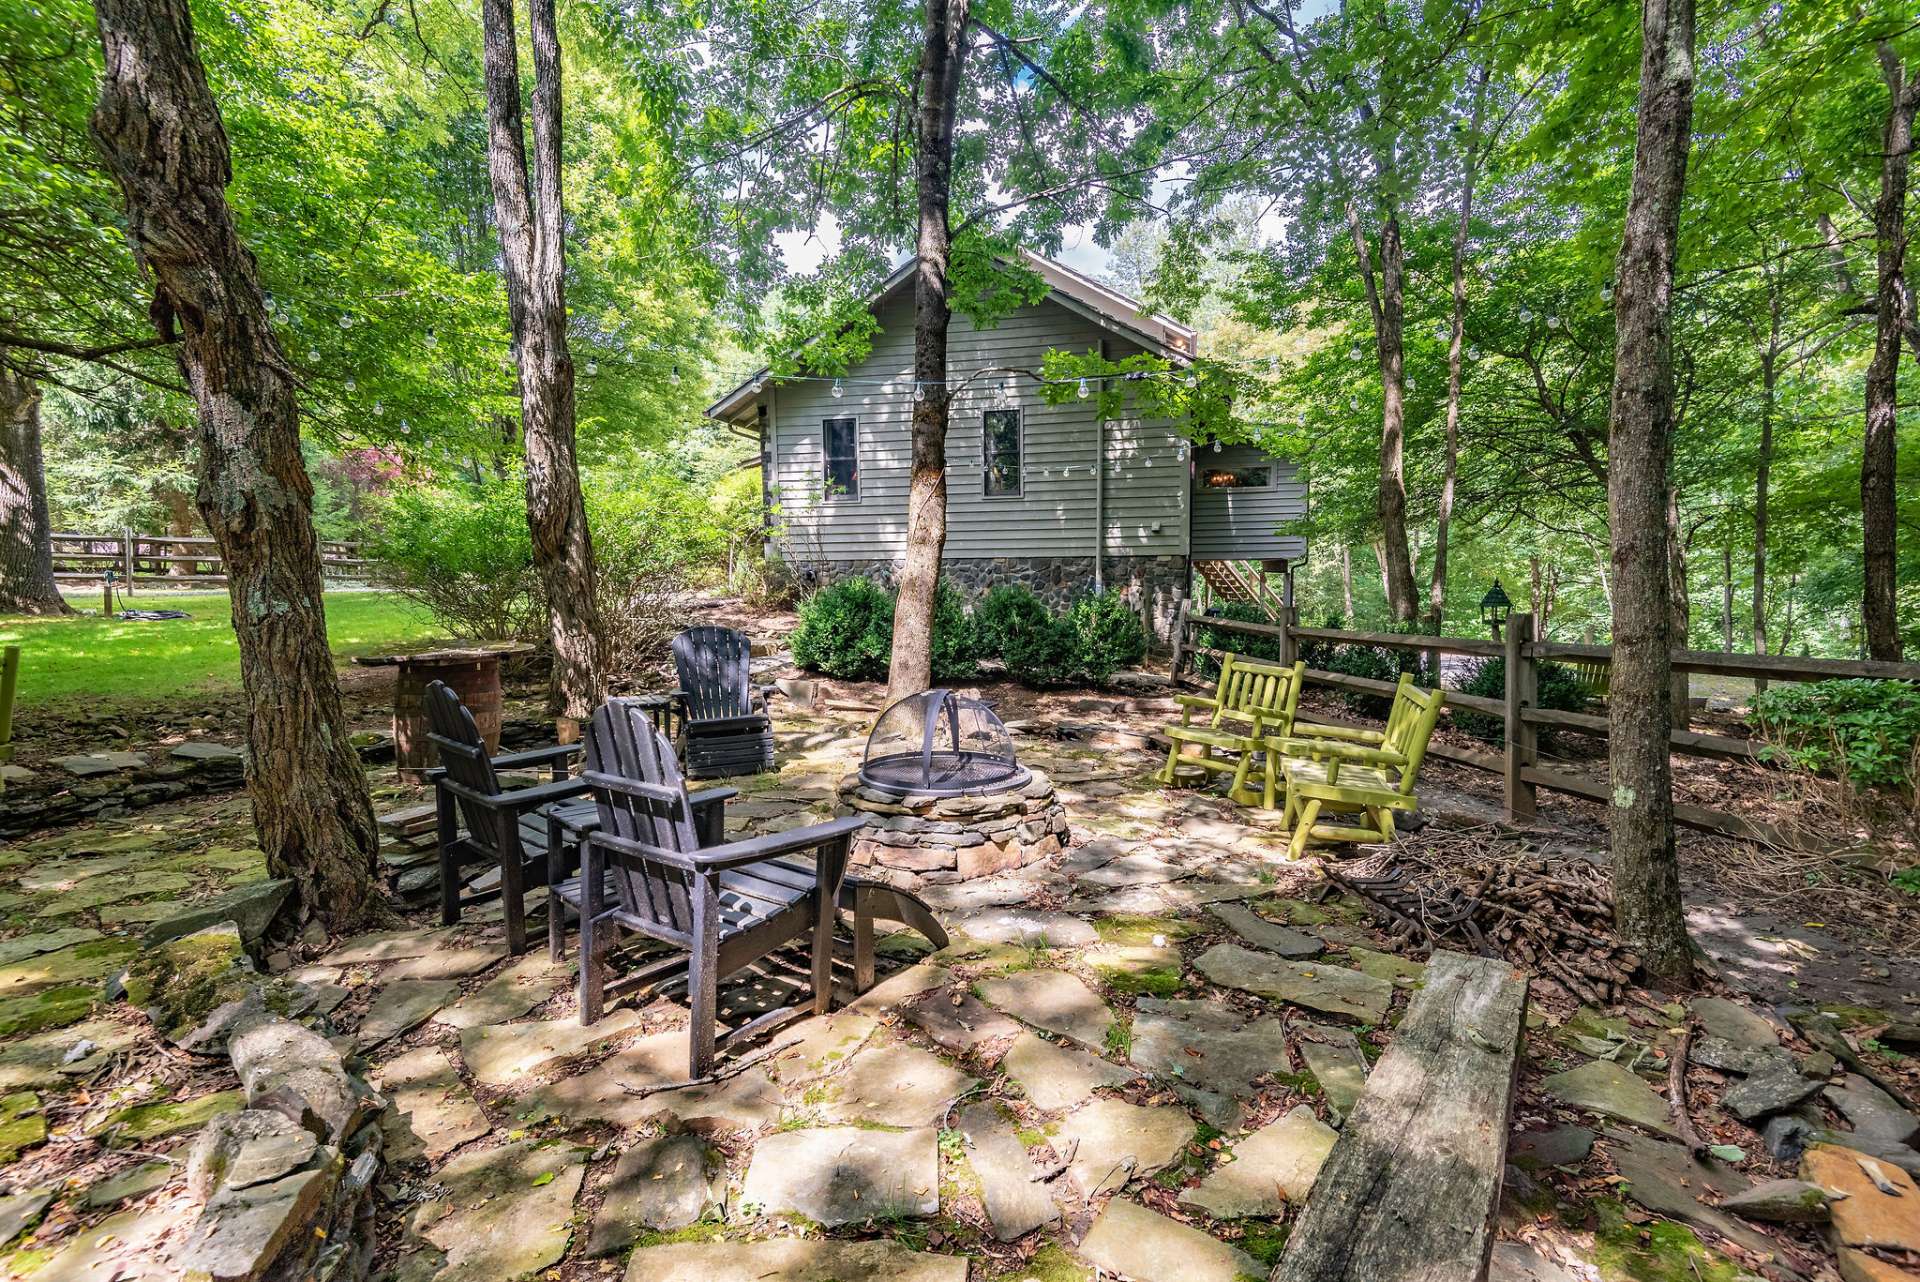 Side yard has a flagstone patio with firepit area for toasting marshmallows and enjoying cool nights.